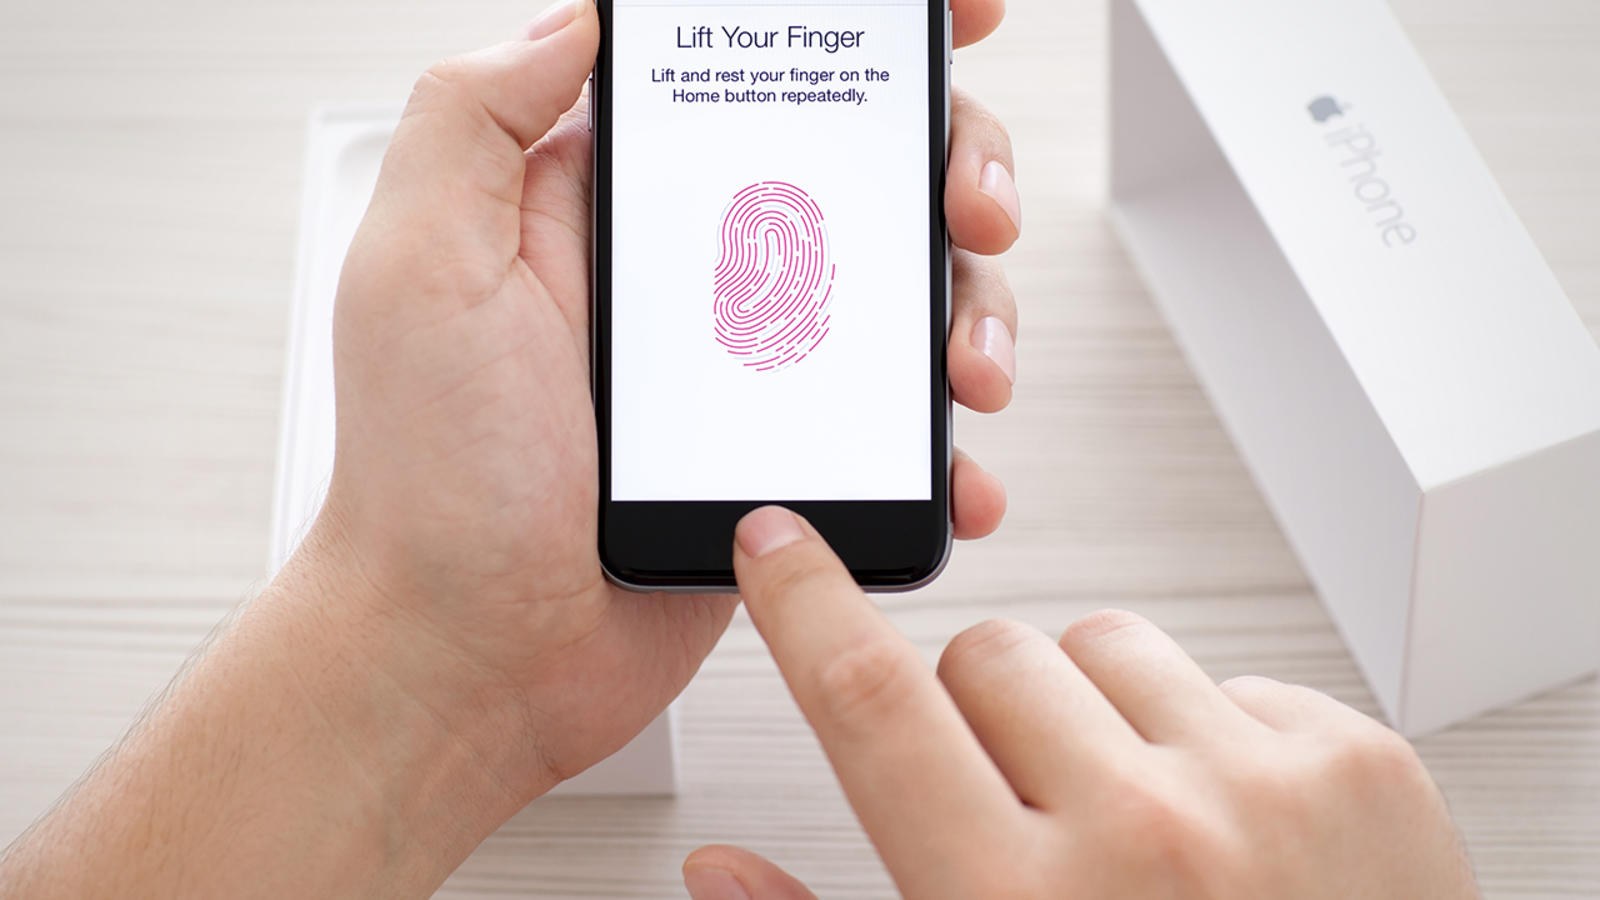 apps-exploiting-touch-id-to-steal-money-booted-out-by-apple